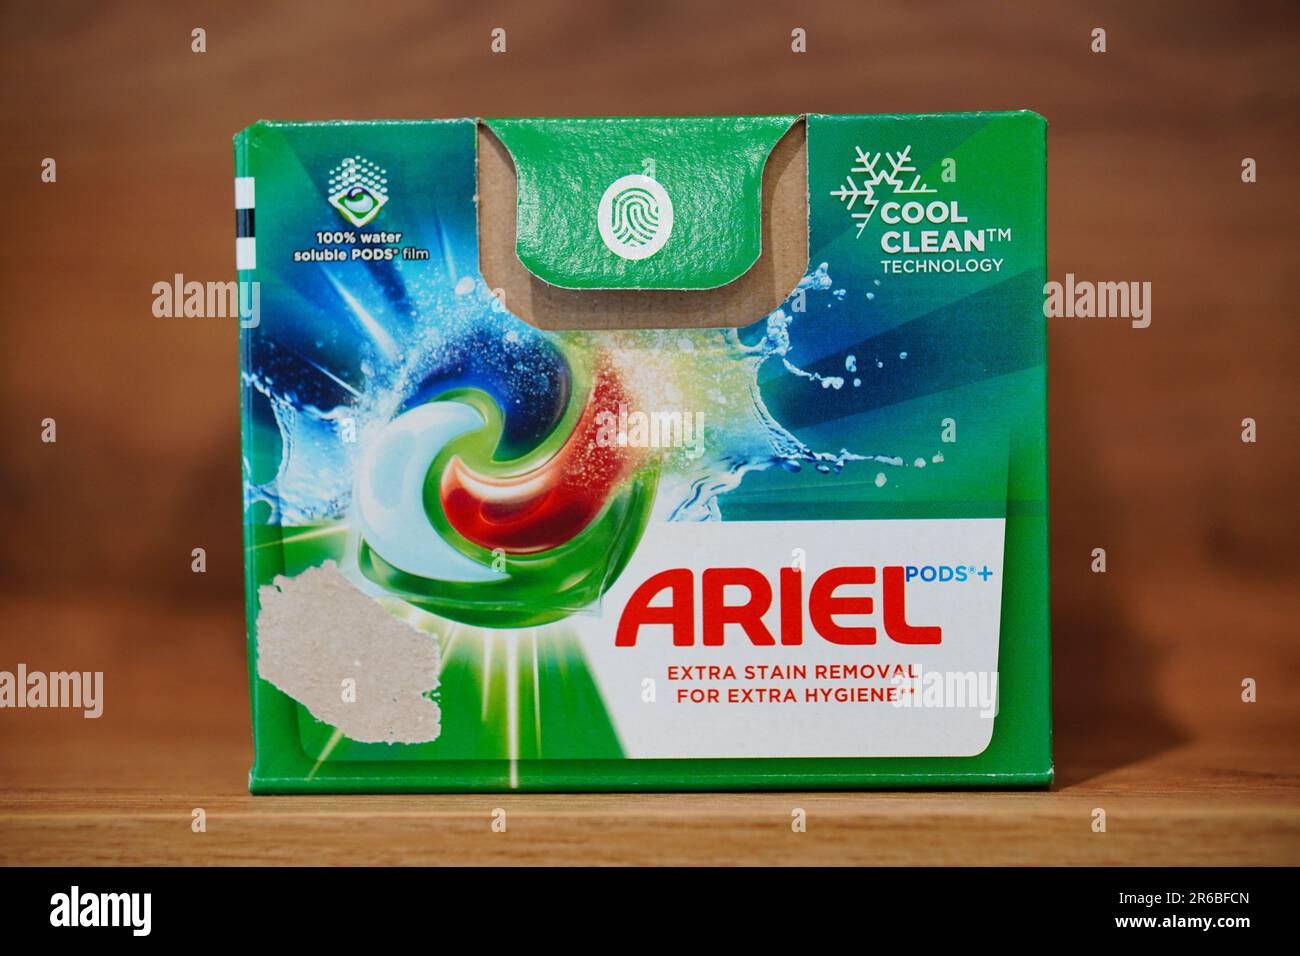 A green cardboard box of washing capsules. Ariel Extra Stain